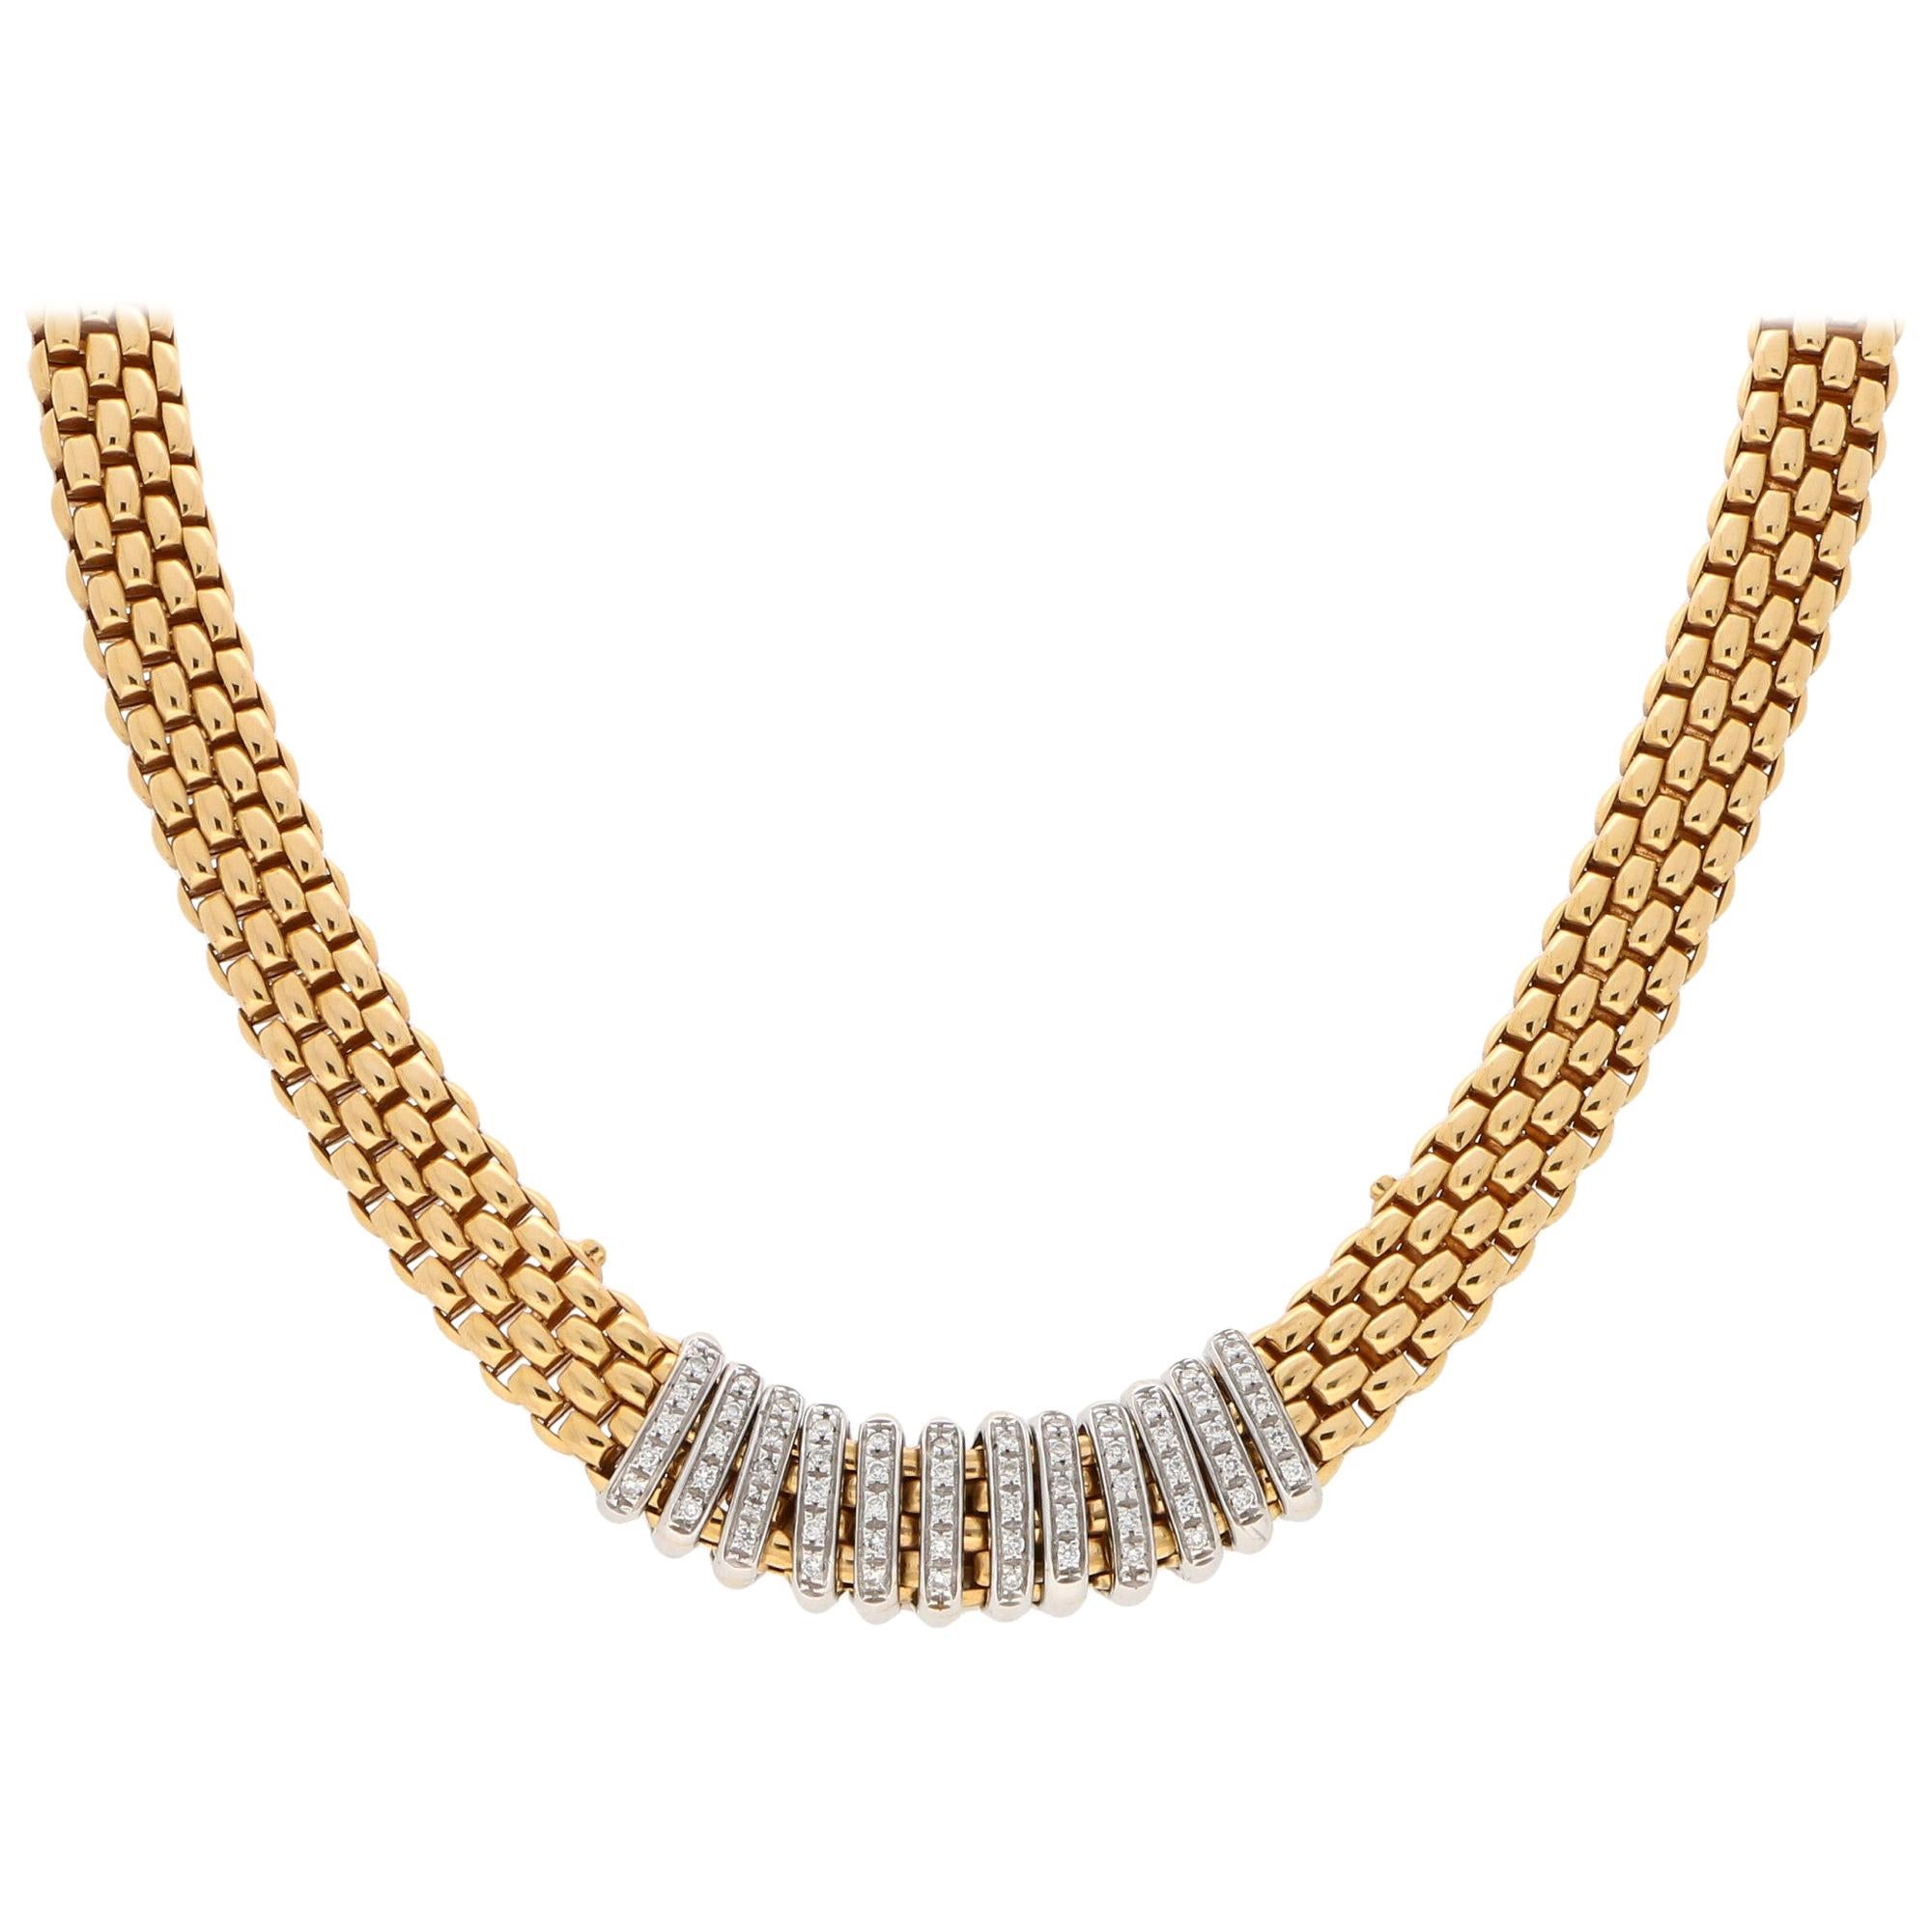 Vendome Diamond Fope Necklace Set in 18 Karat Yellow and White Gold